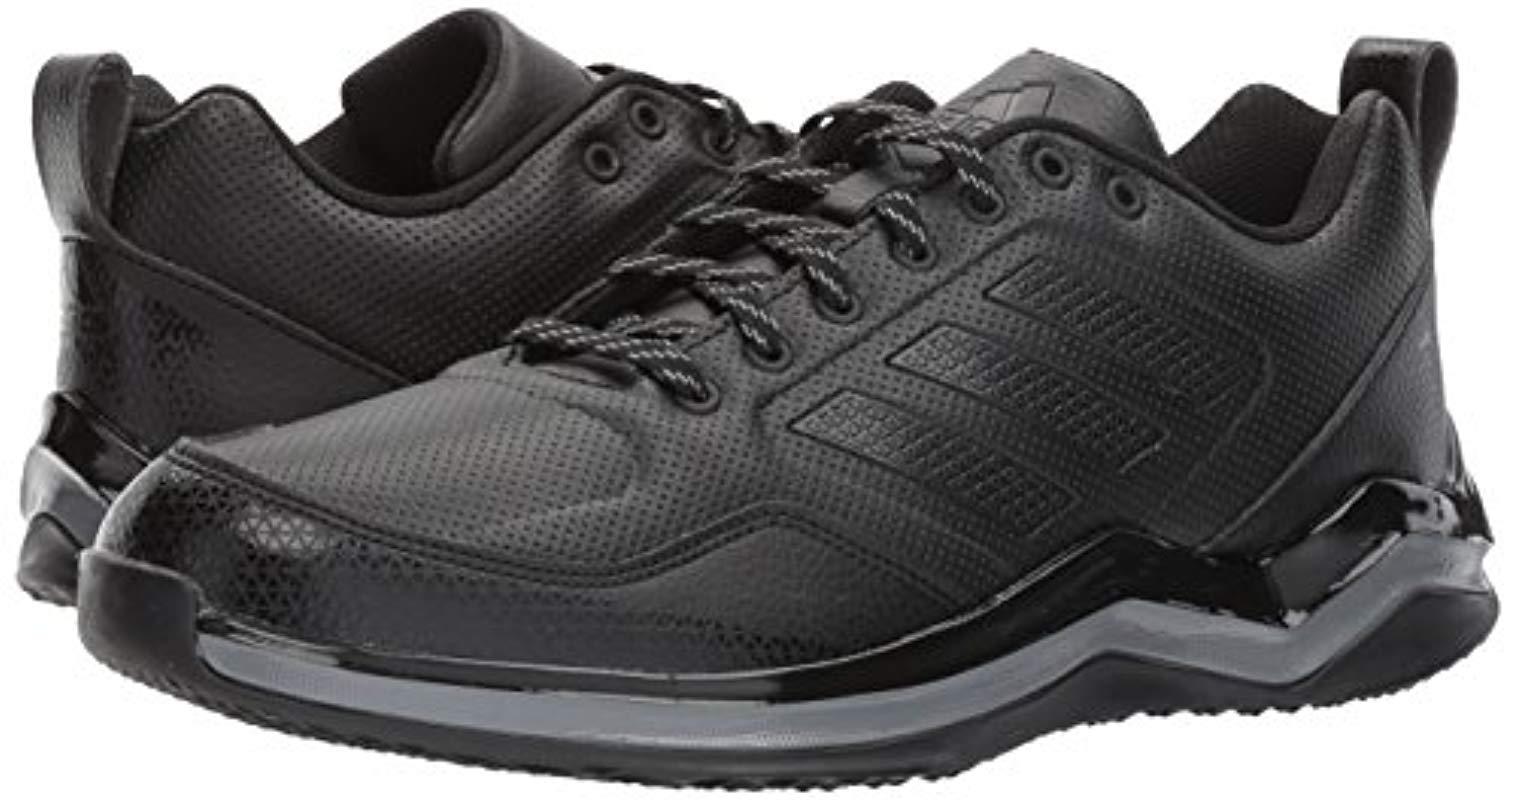 adidas Speed Trainer 3 Sl Shoes in Black for Men - Lyst